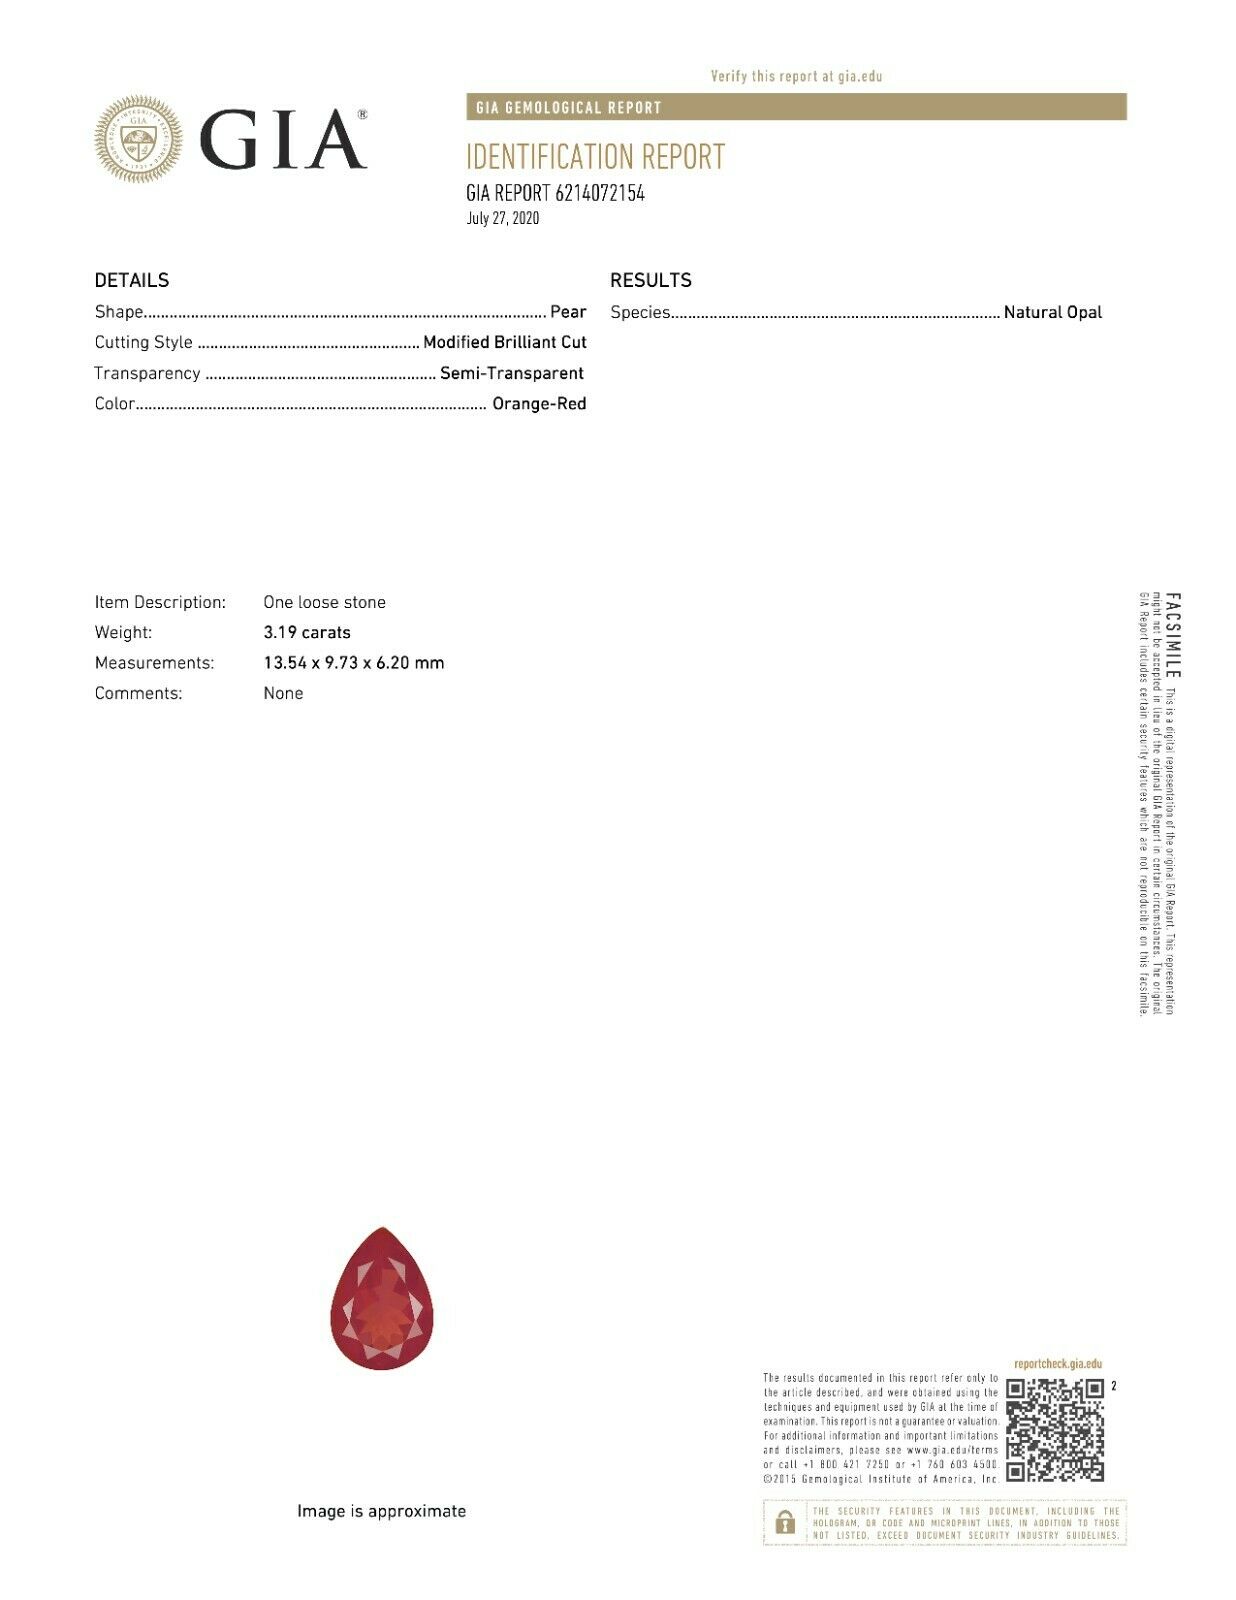 GIA Identification Report for a 3.19 ct. pear shape red fire opal